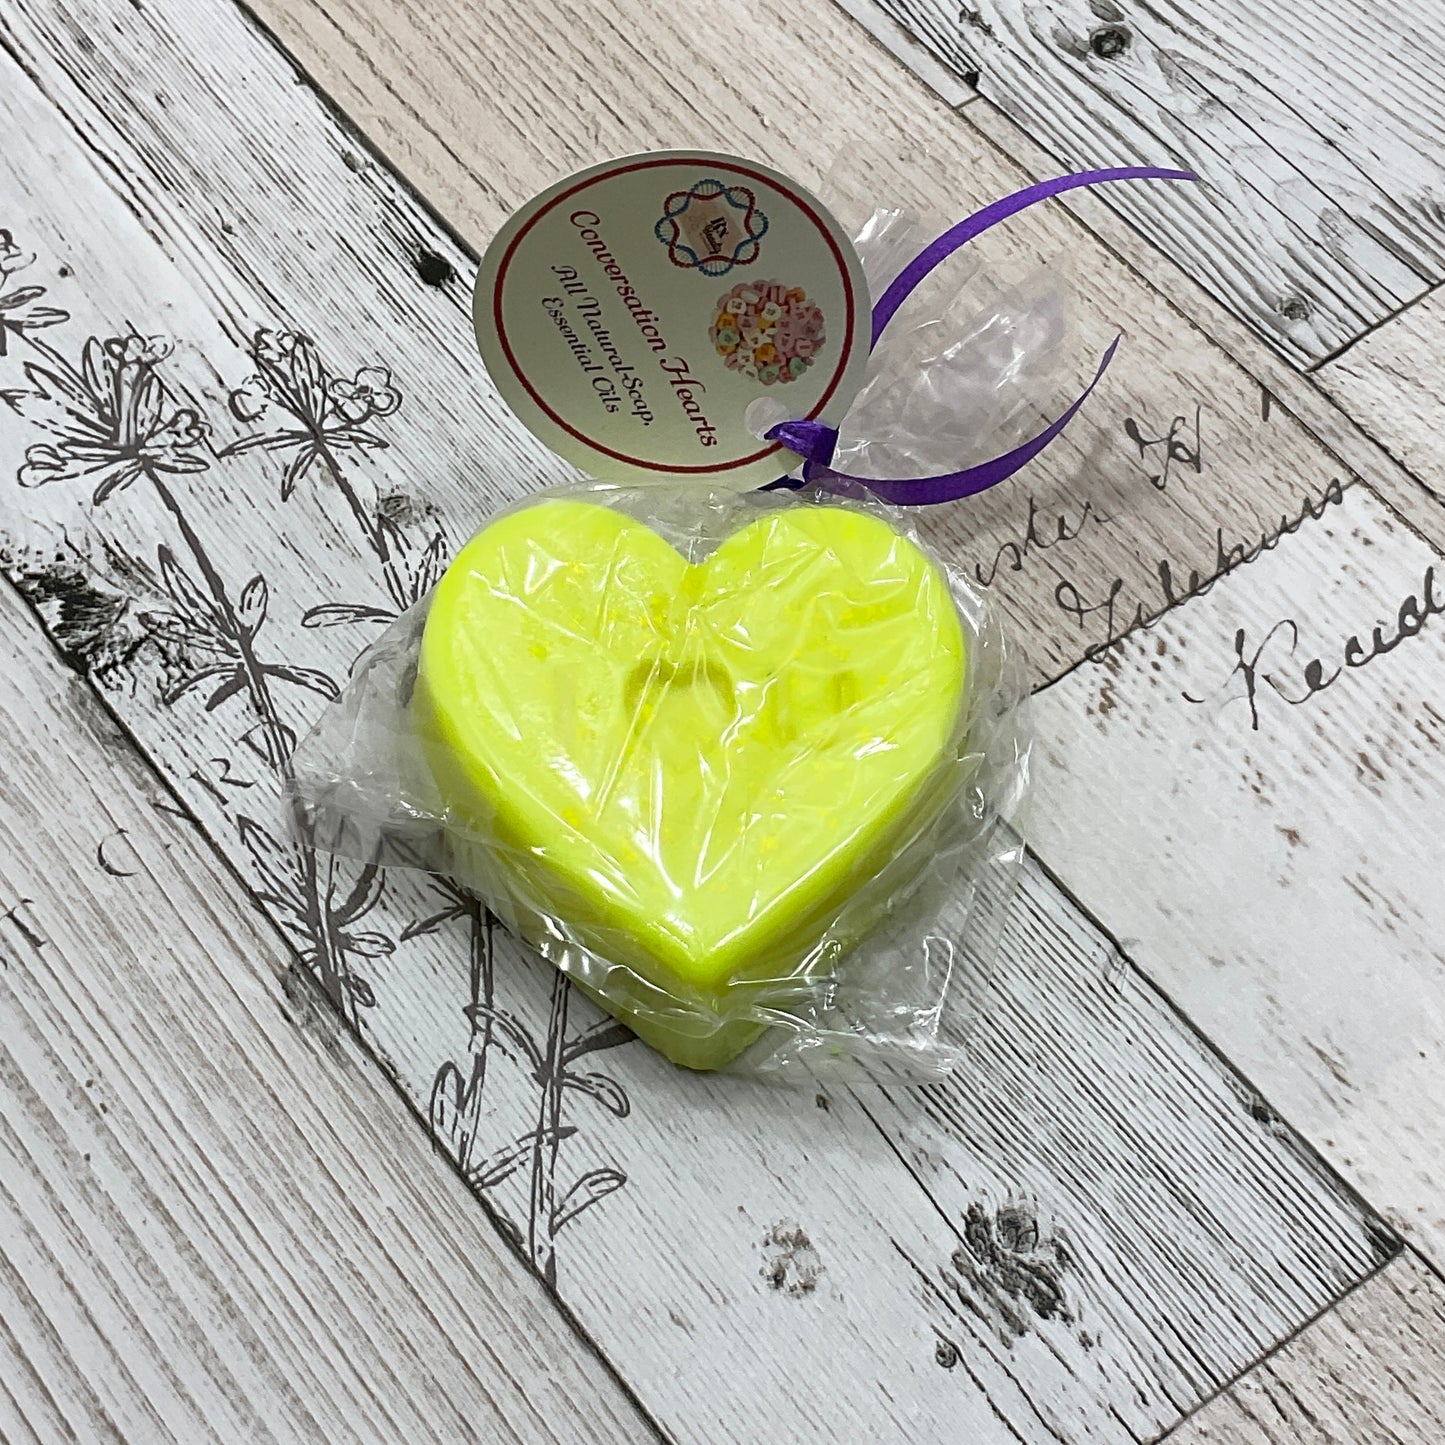 Conversation Heart Soaps - Sassy Chick Clothing